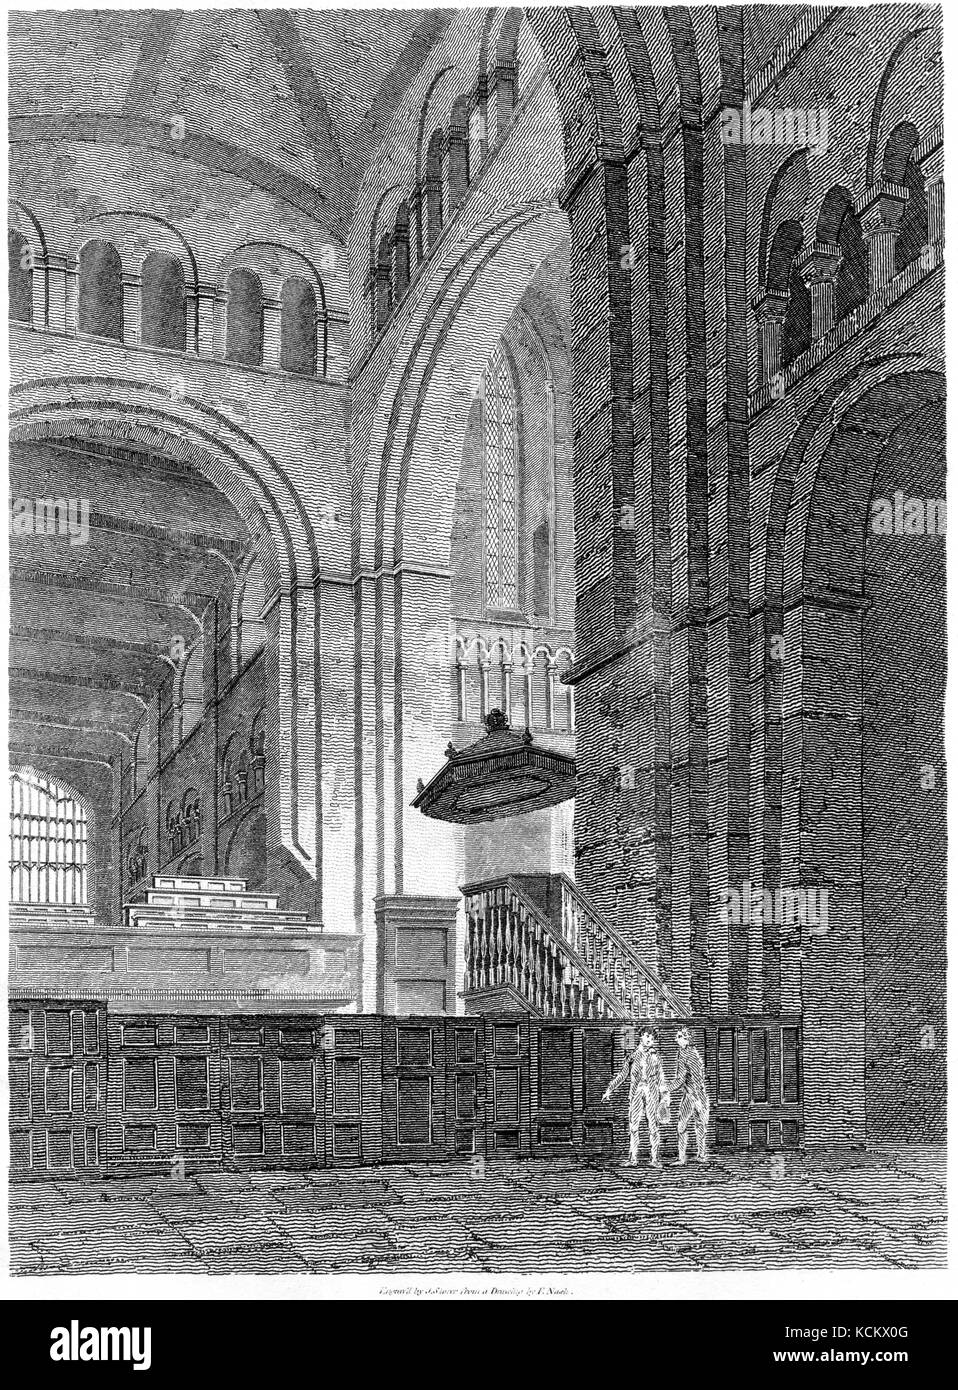 An engraving of the Interior of the Abbey Church, St Albans, Herts scanned at high resolution from a book printed in 1819.  Believed copyright free. Stock Photo